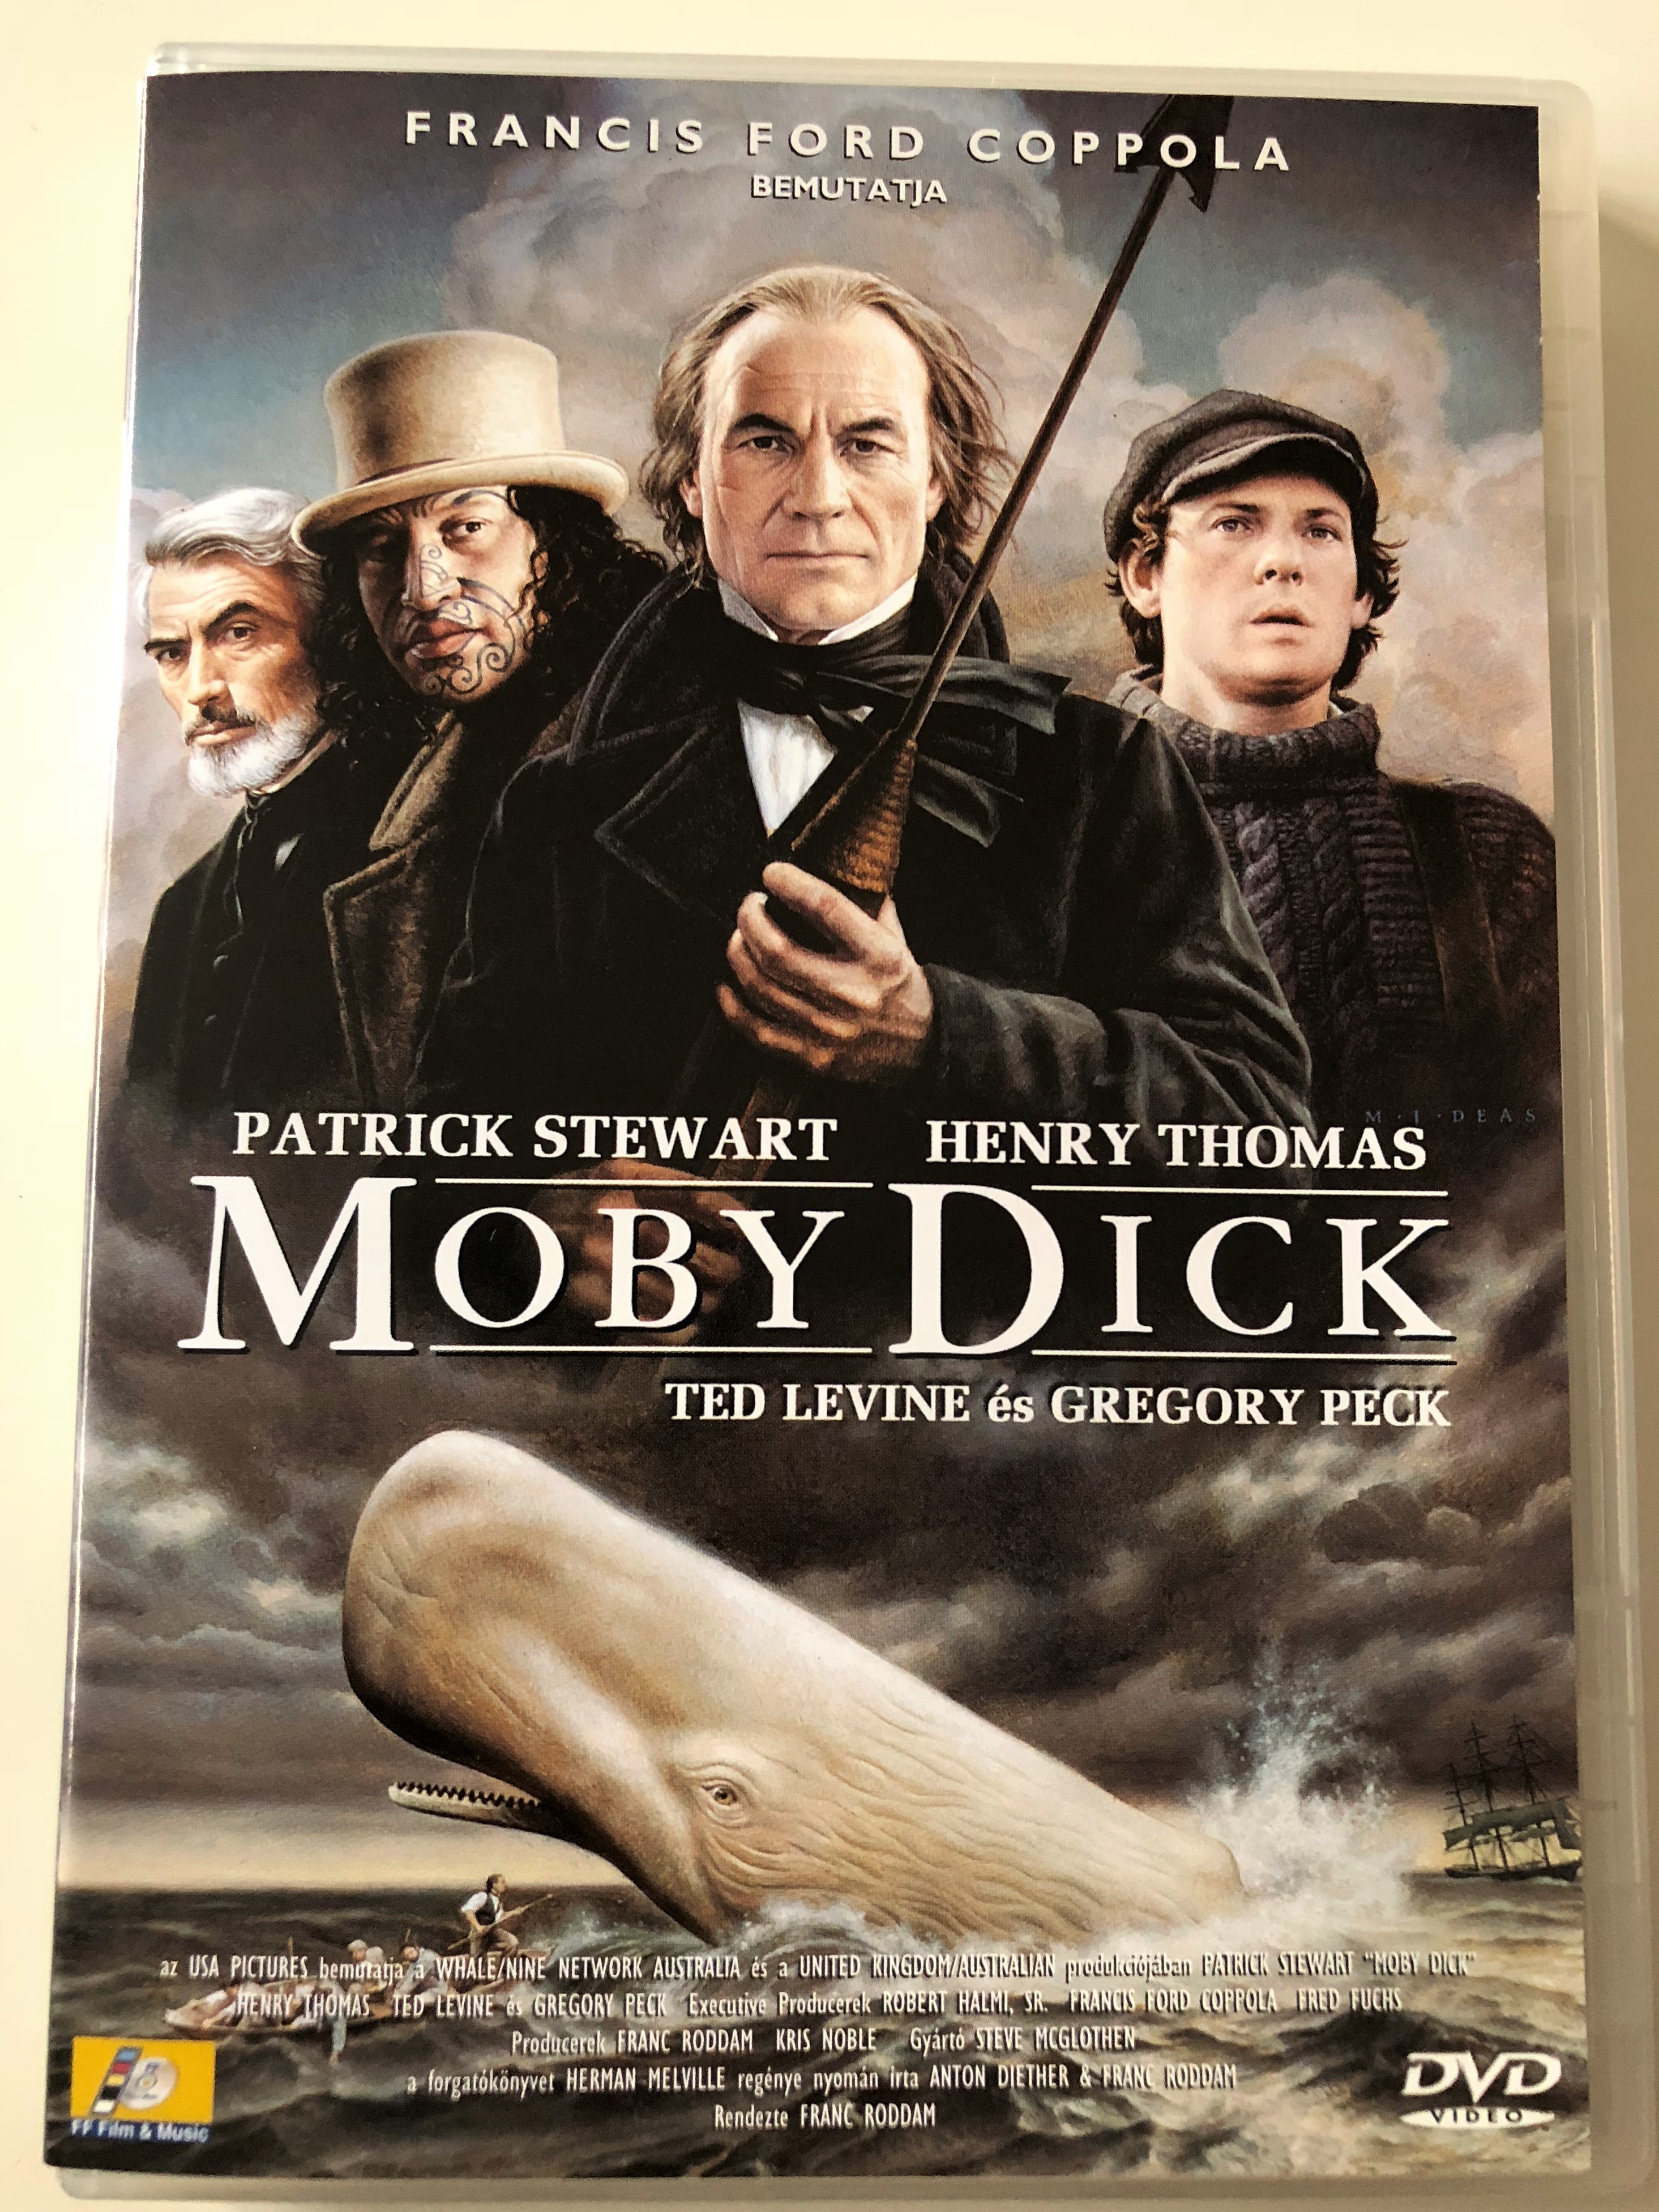 Gregory peck 1998 moby dick